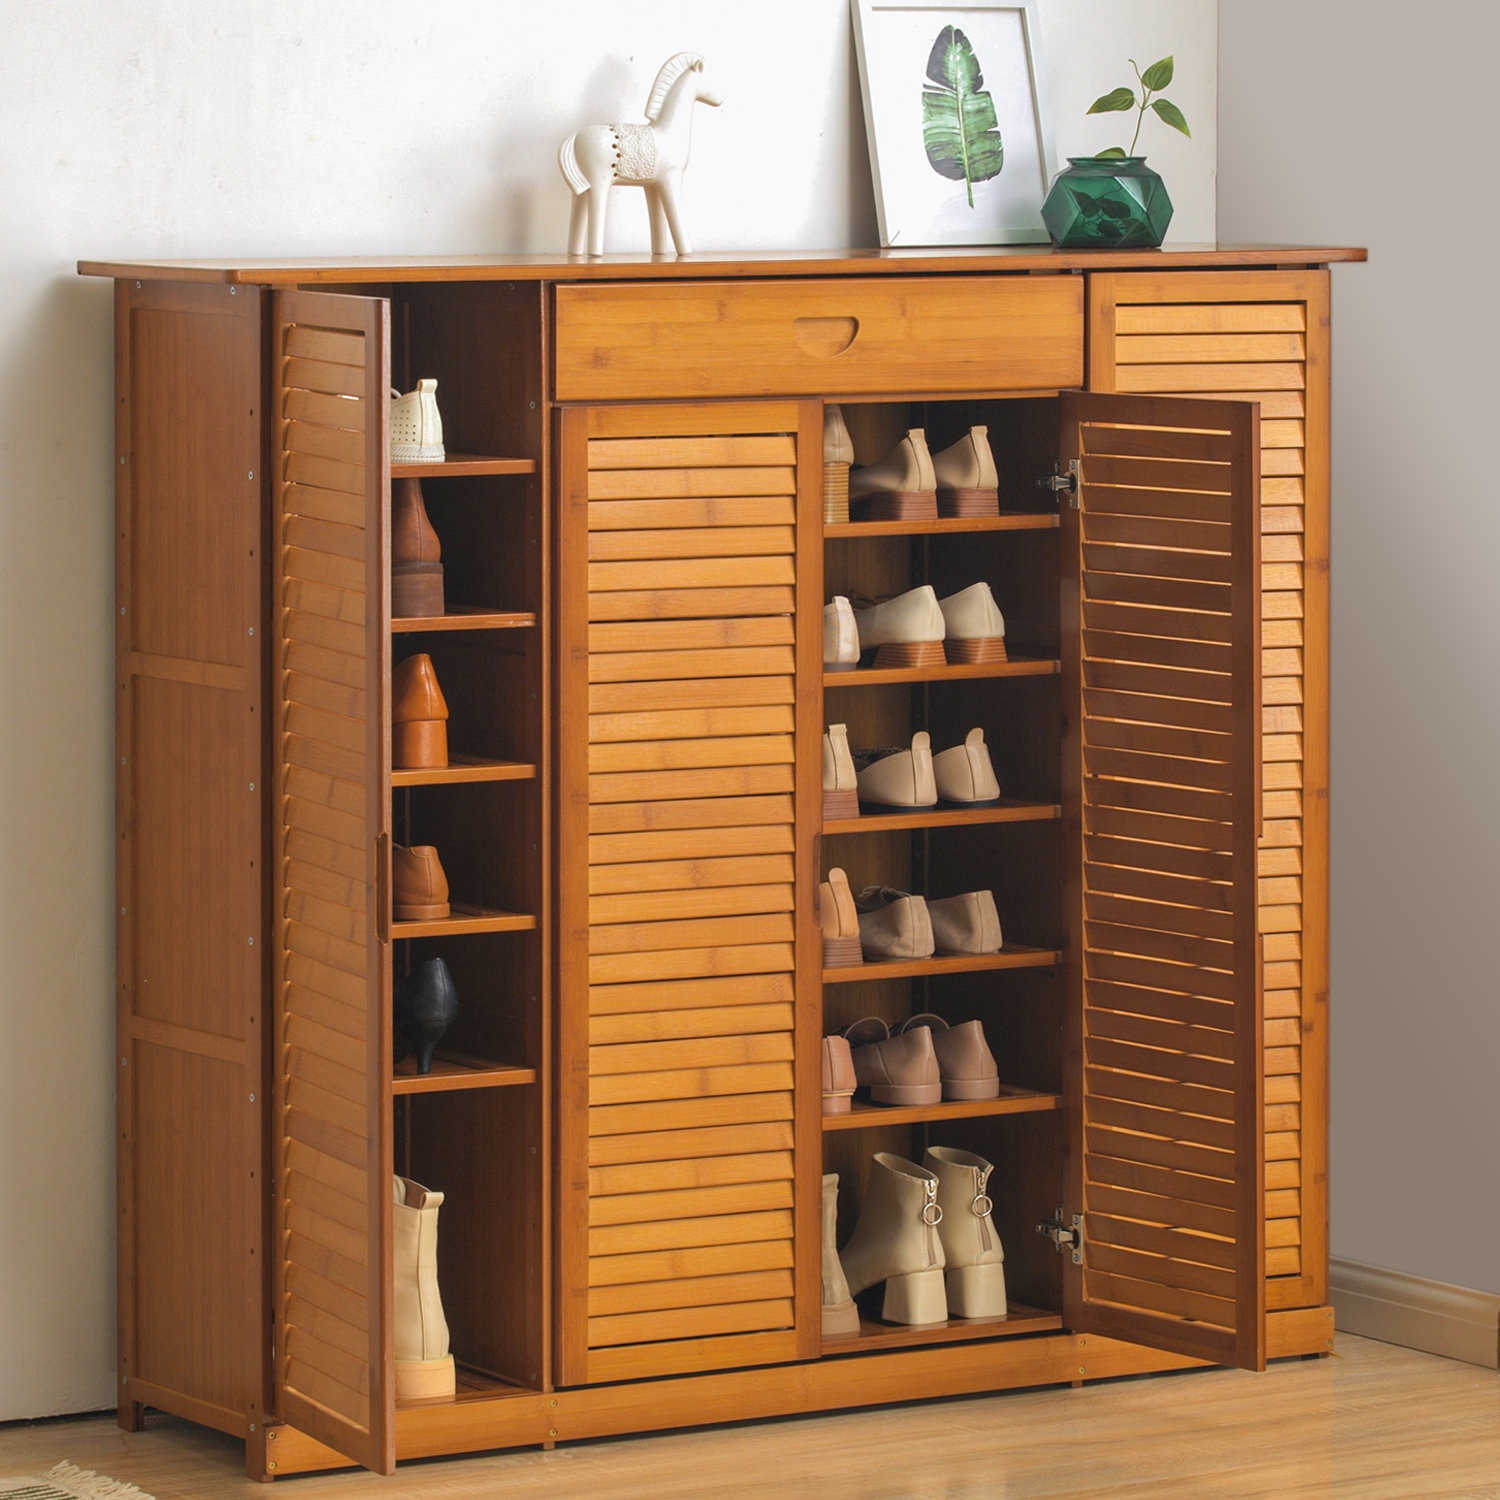 Shoe Cabinet with Metal Legs, Free Standing Shoe Storage Shelve